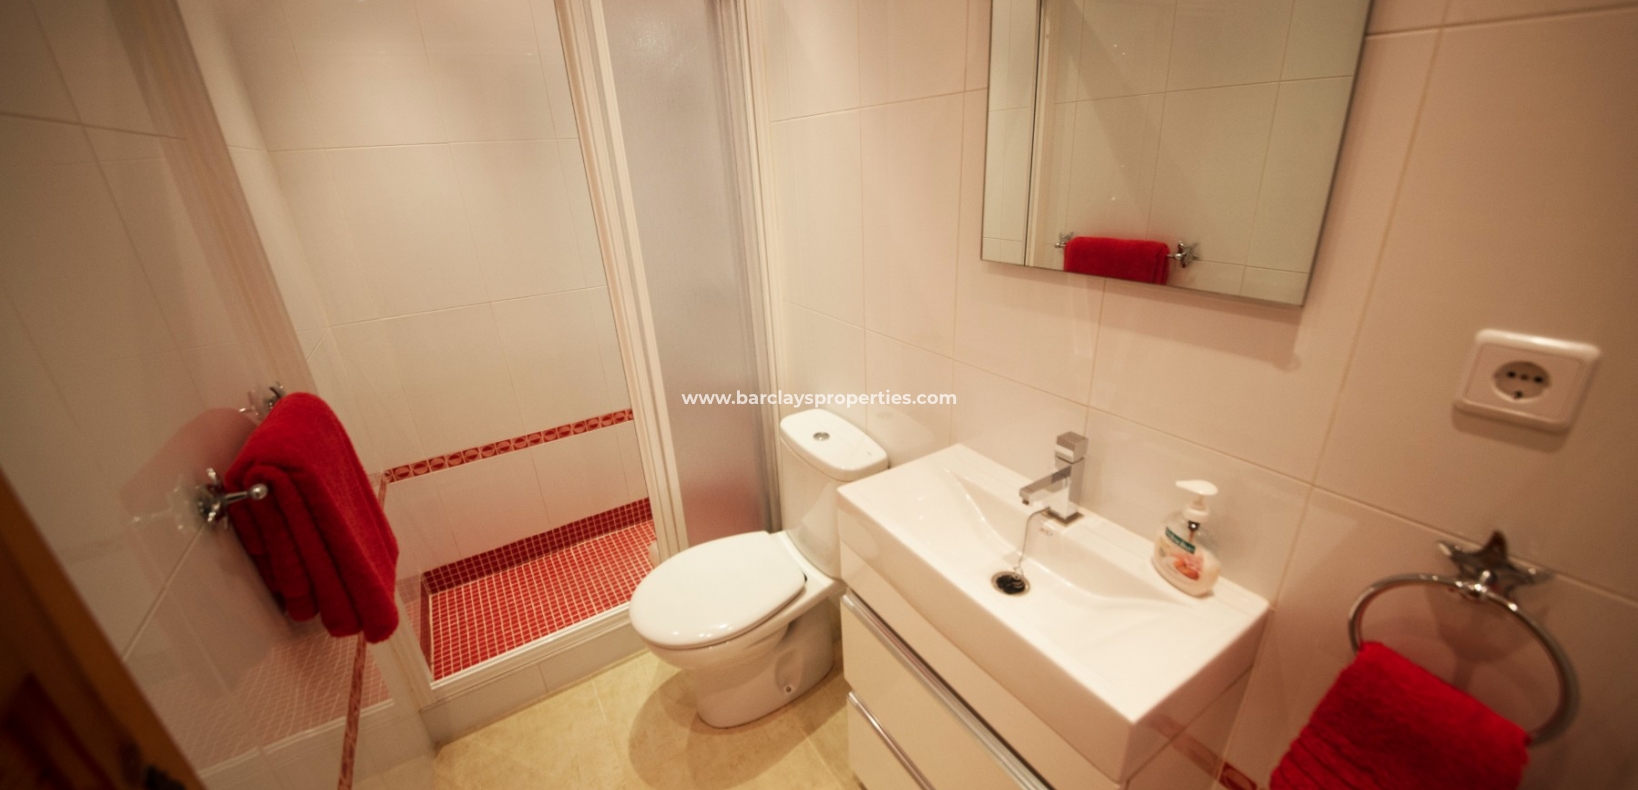 Bathroom - South Facing Terraced House For Sale in Alicante, Spain